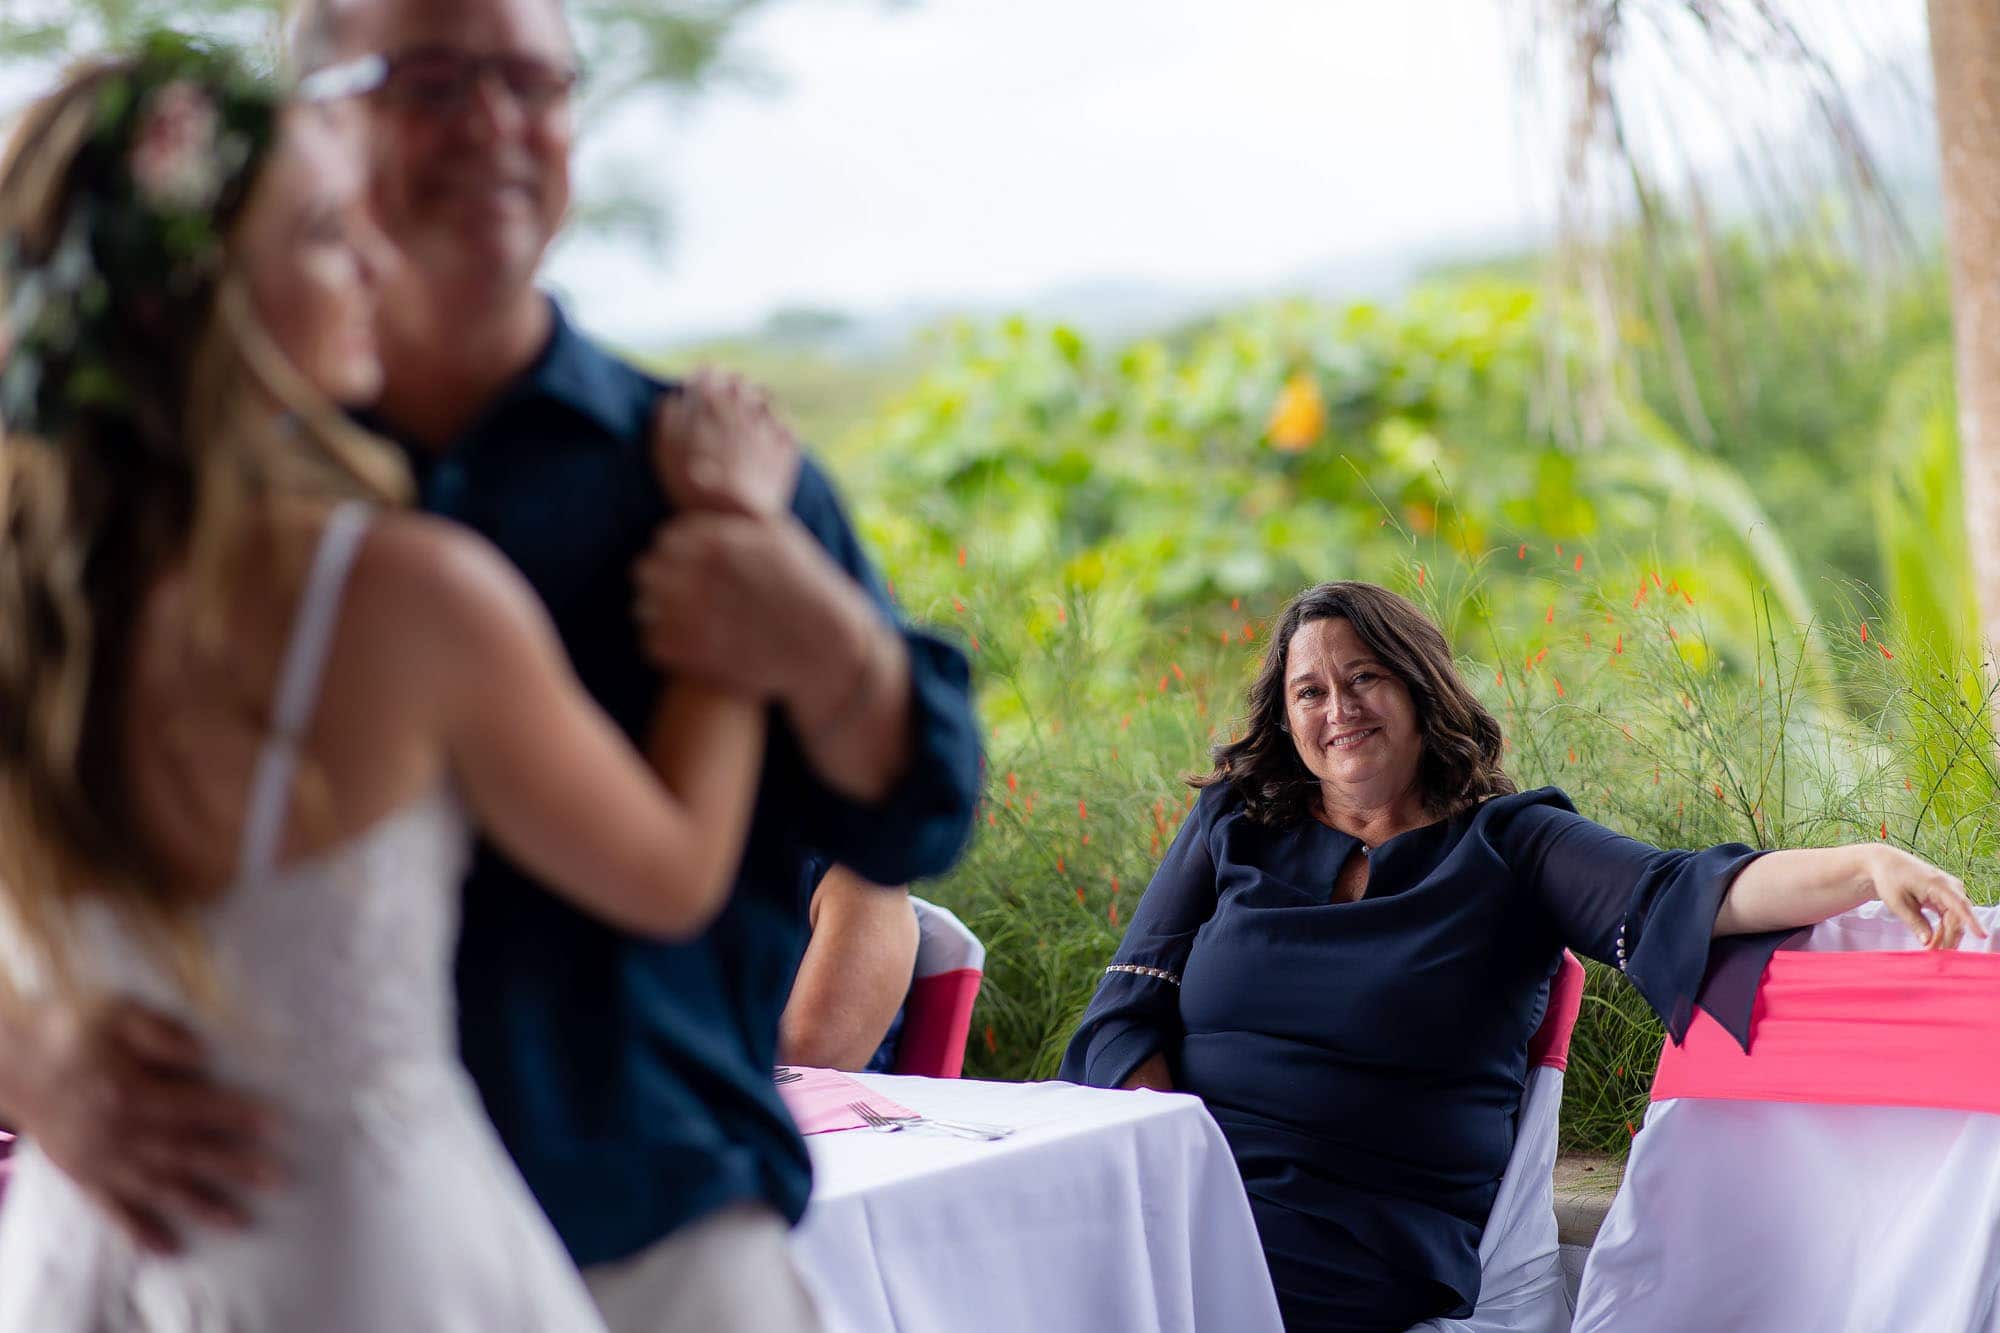 Mom reacts with a smile as bride dances with dad